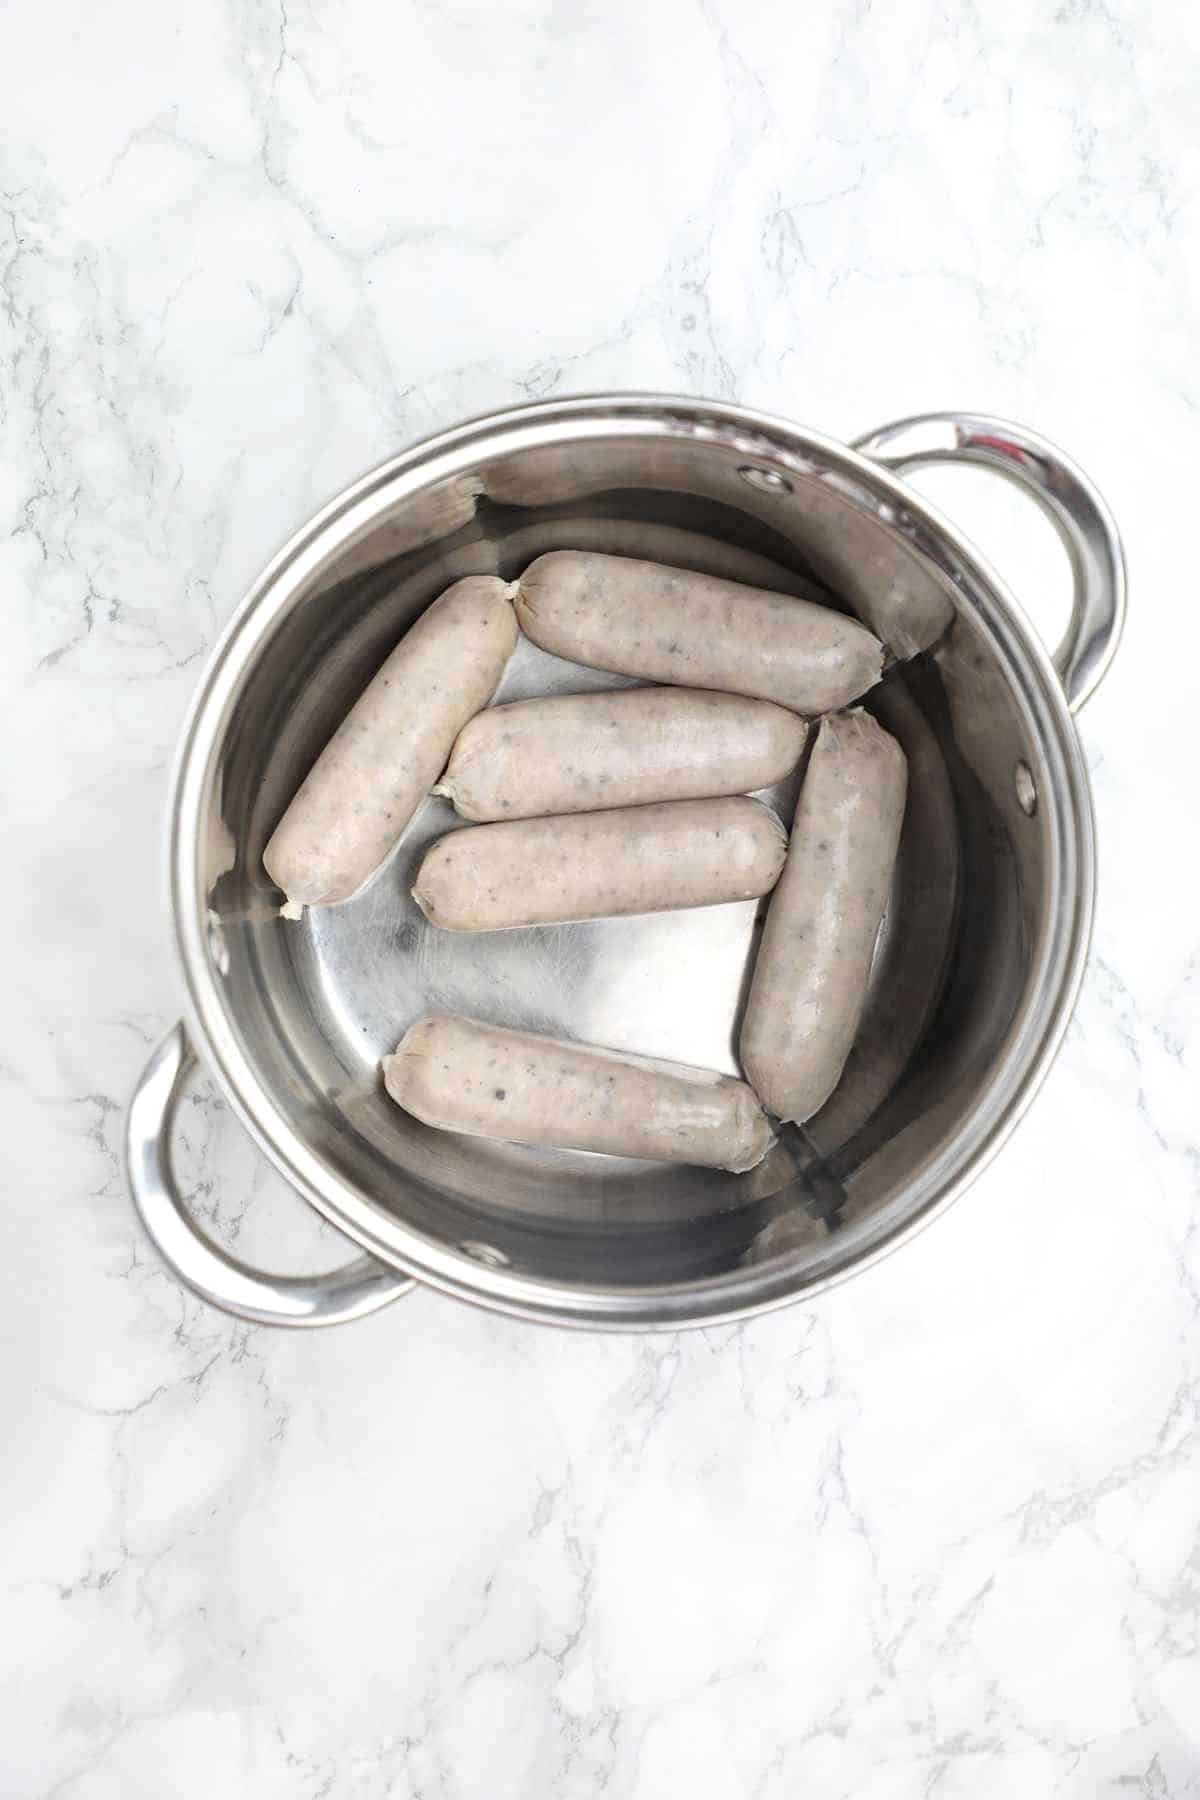 Sausage in a pot.